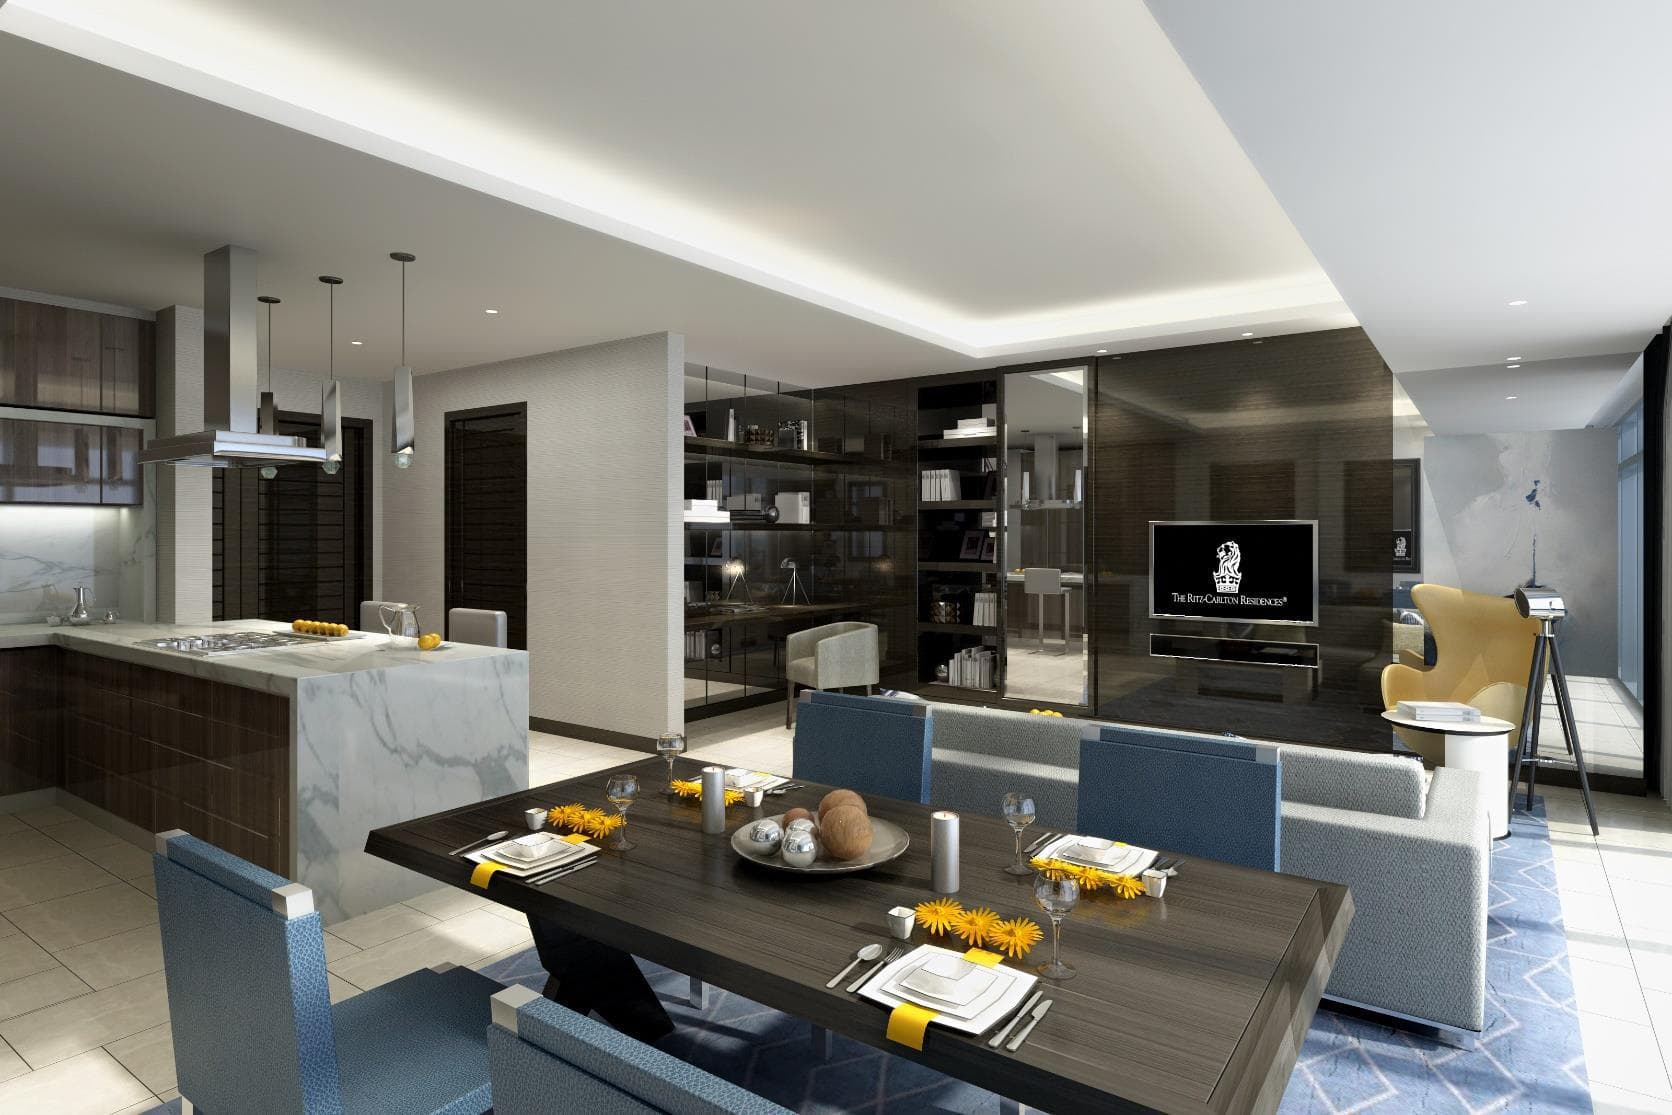 1 Bedroom Serviced Residences For Sale The Ritz Carlton Residences Lp0838 21dff2df4afd8a00.jpg